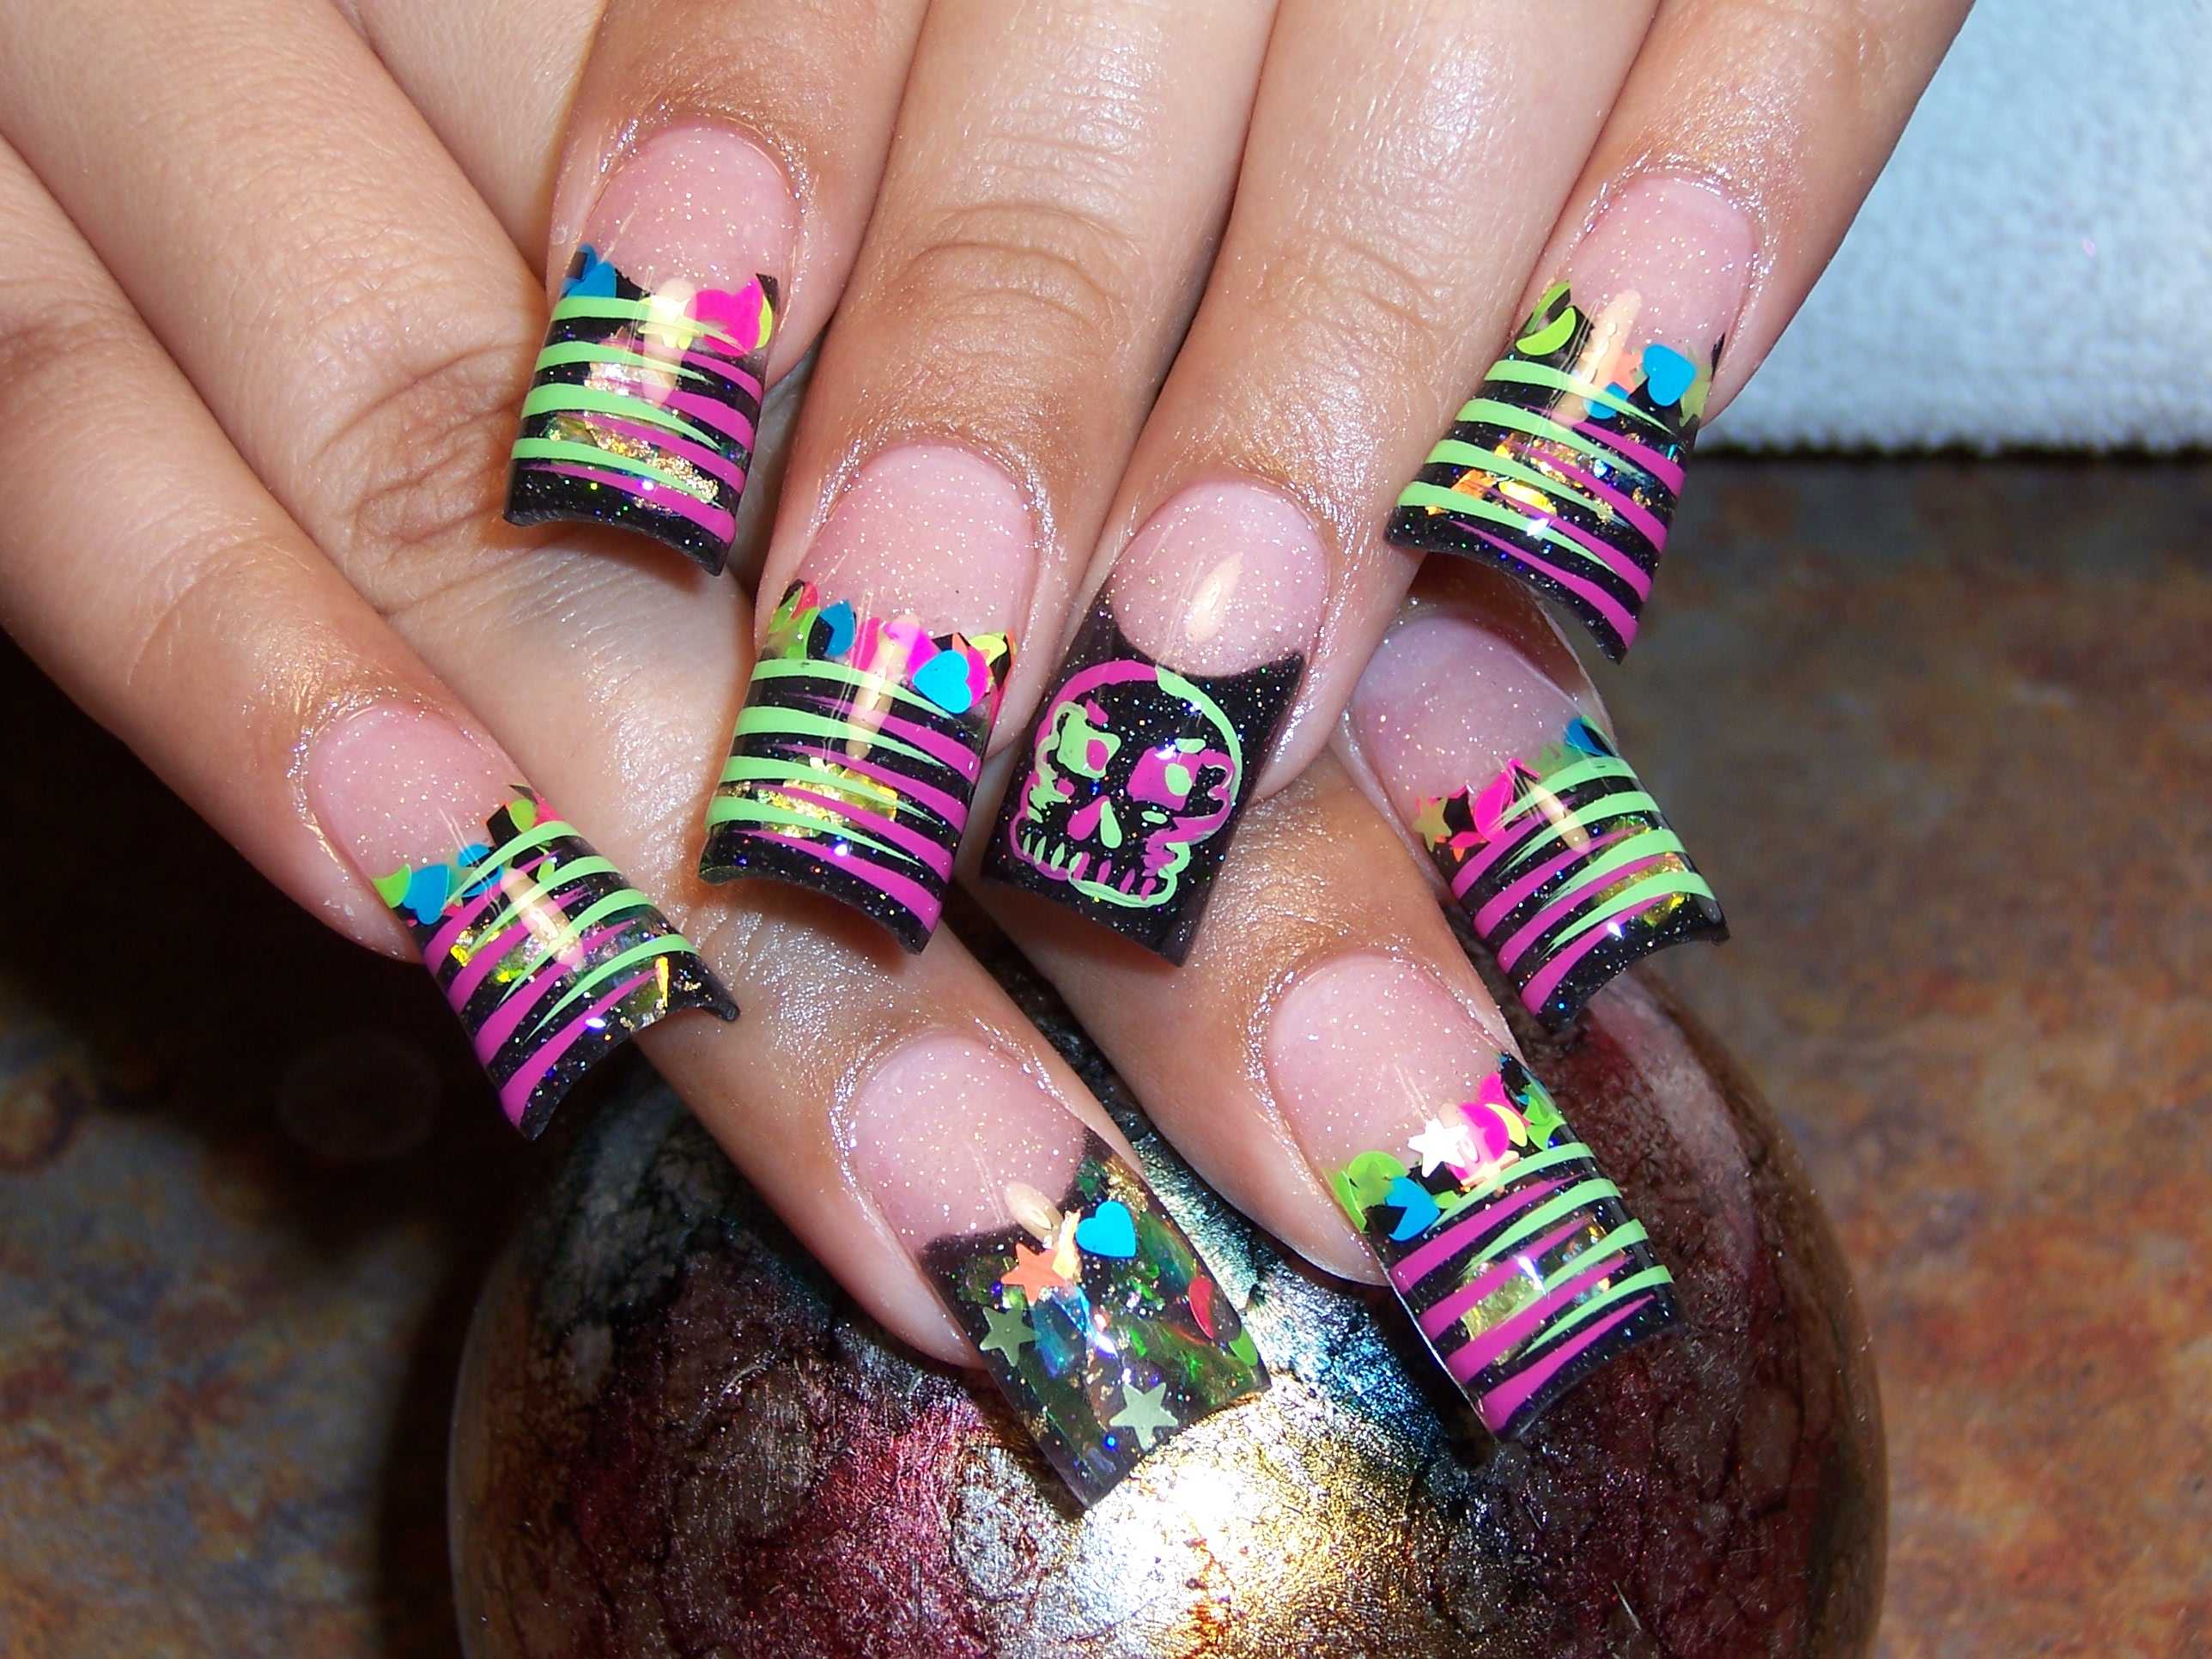 6. Colorful Nail Art Ideas for Girls - wide 3